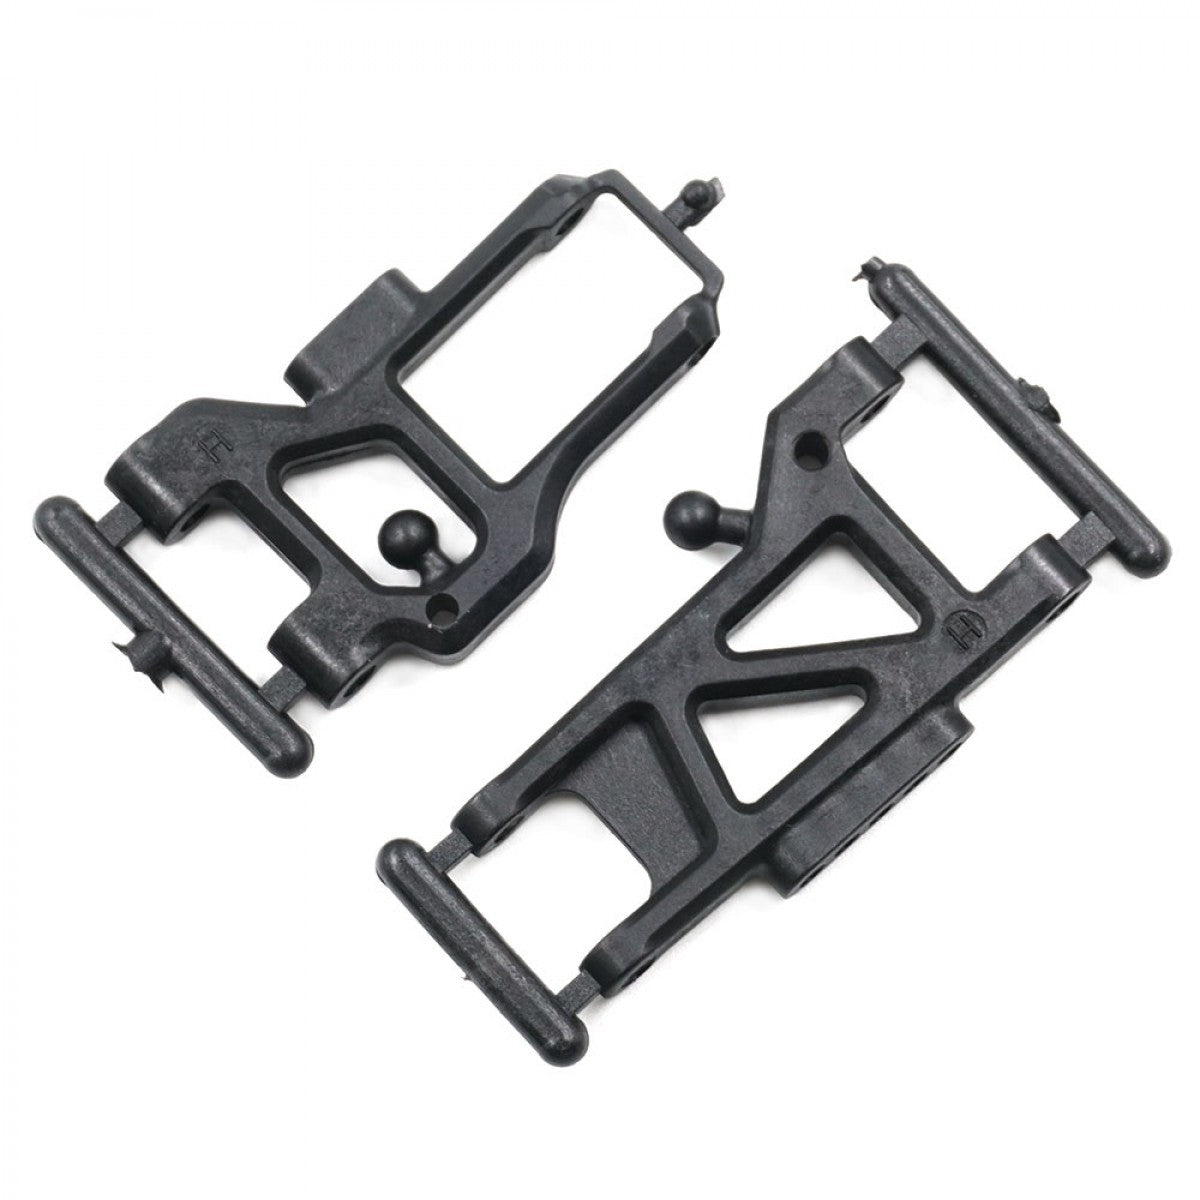 Xpress XP-10459 Hard Composite Front and Rear Arm for XM1S FM1S